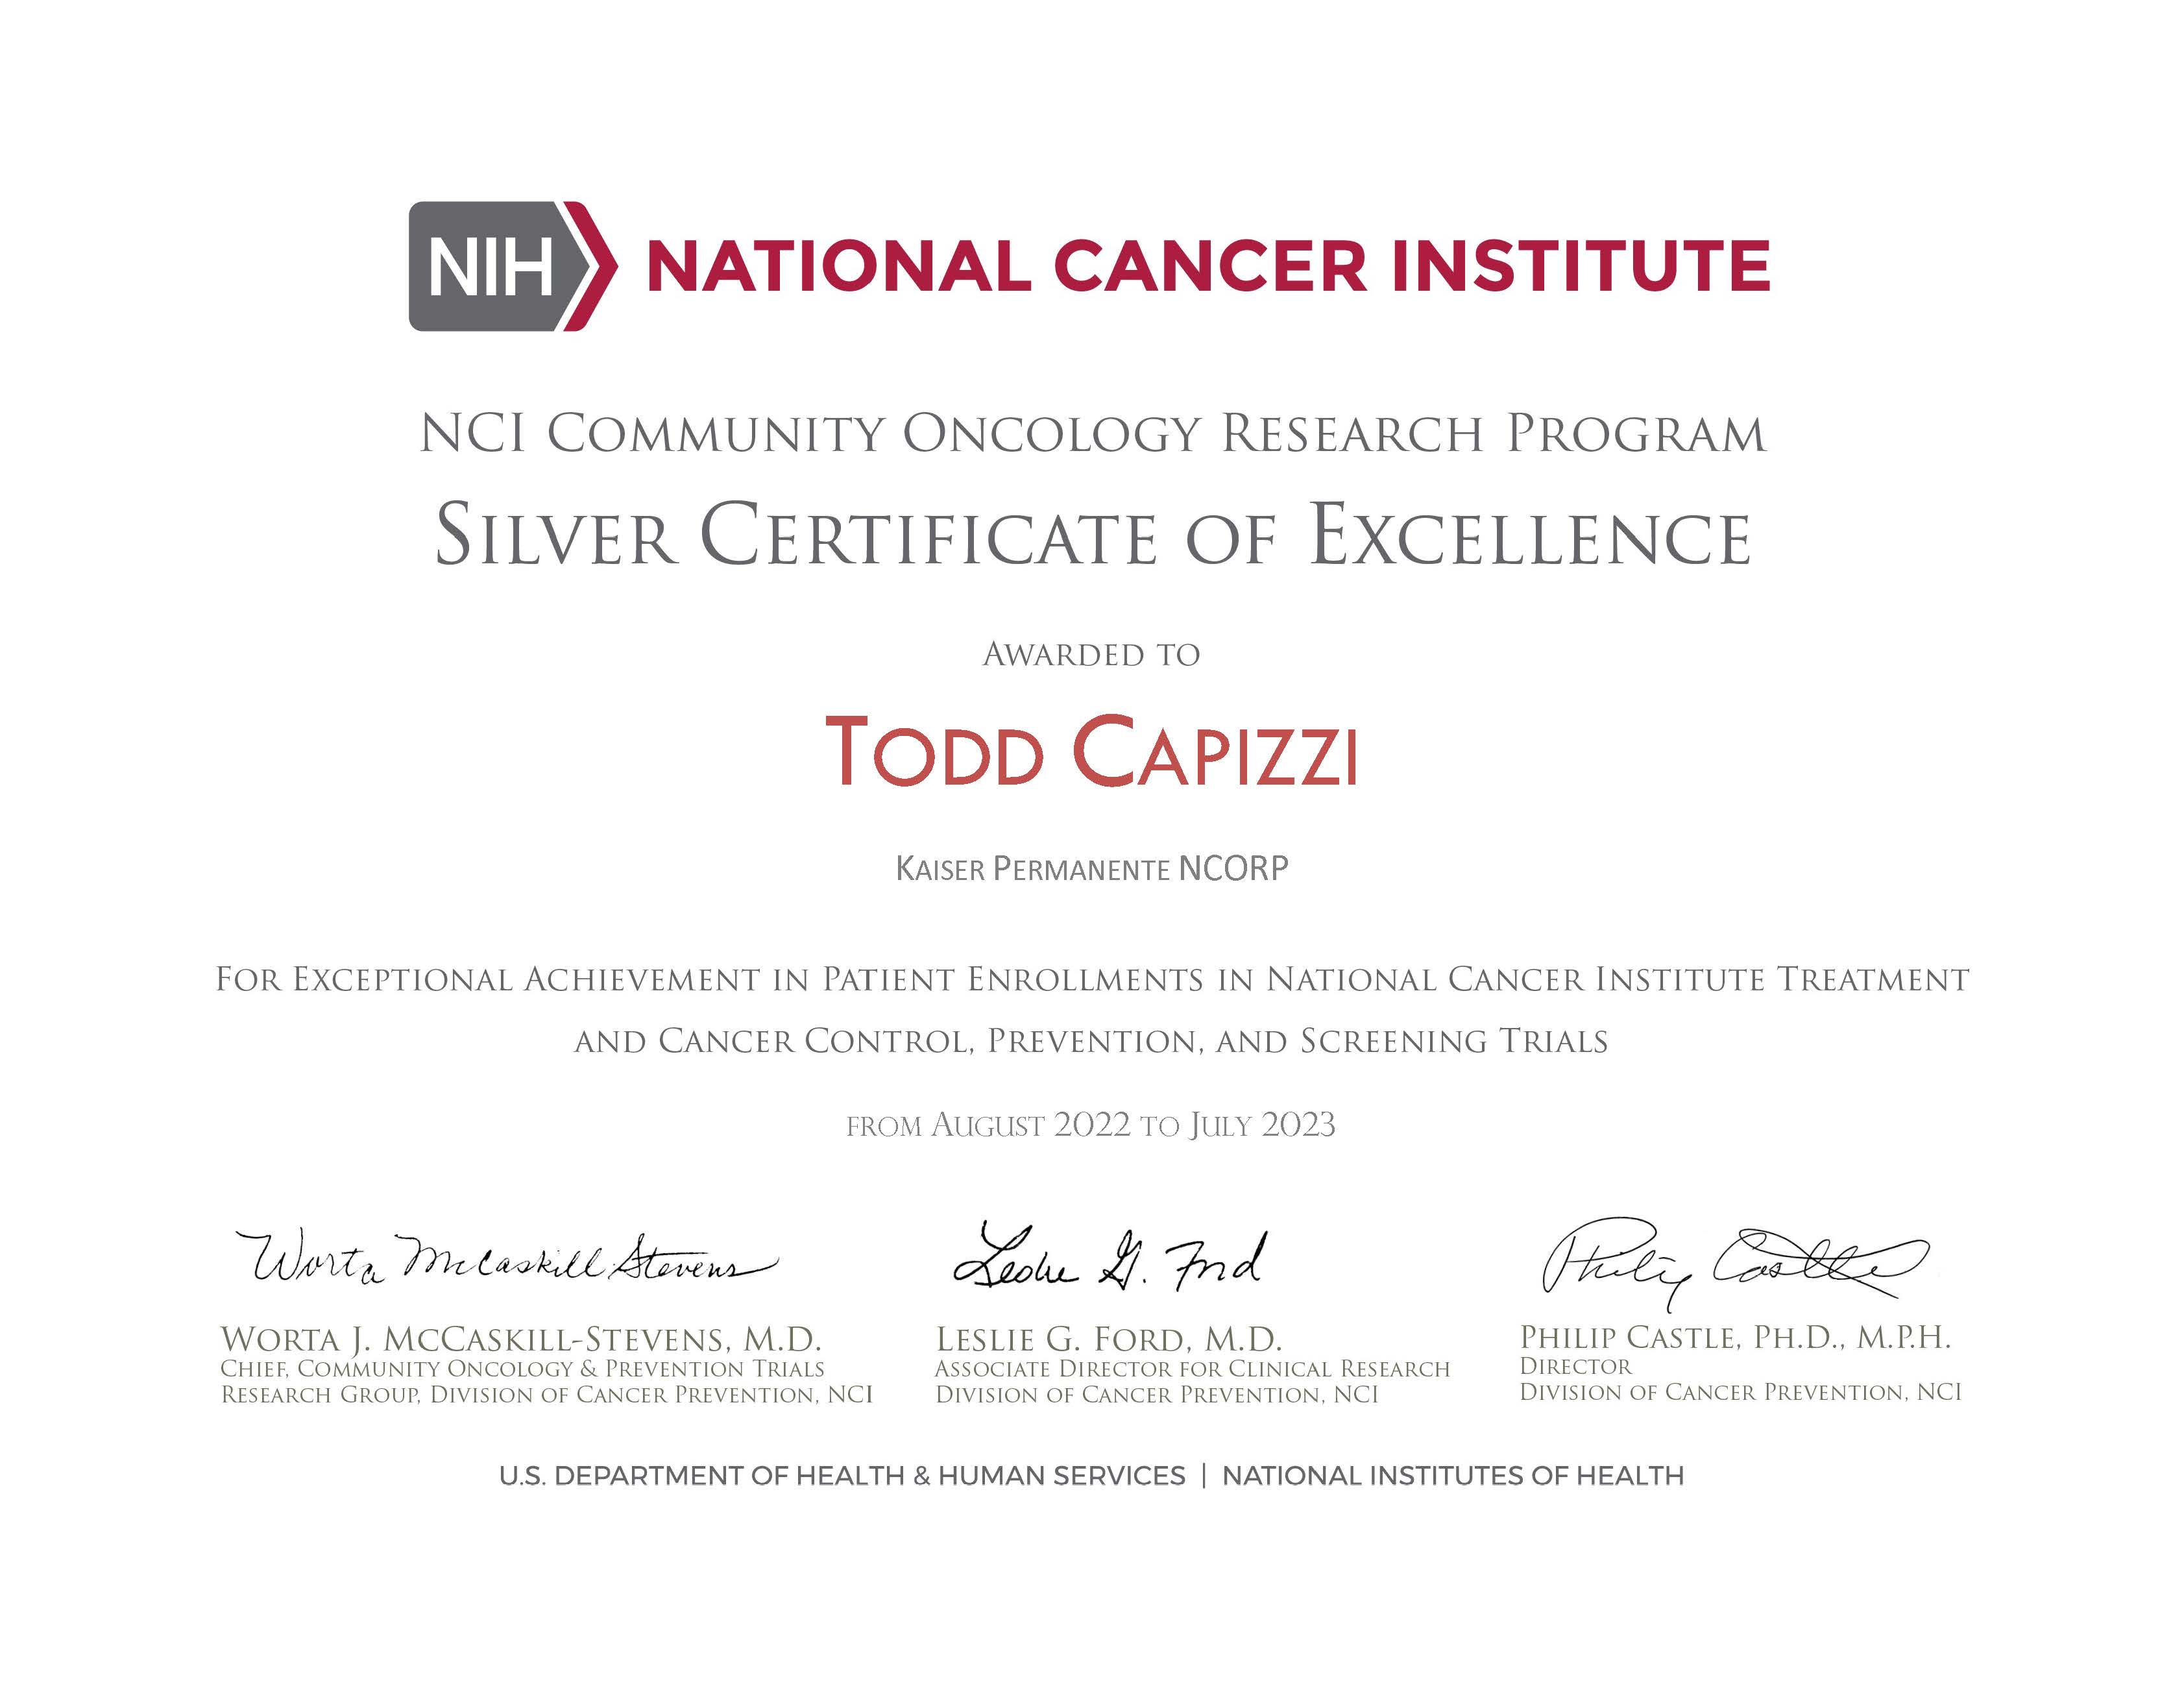 Image of Dr. Capizzi's Silver Certificate of Excellence for their exceptional achievement in clinical trial participation.